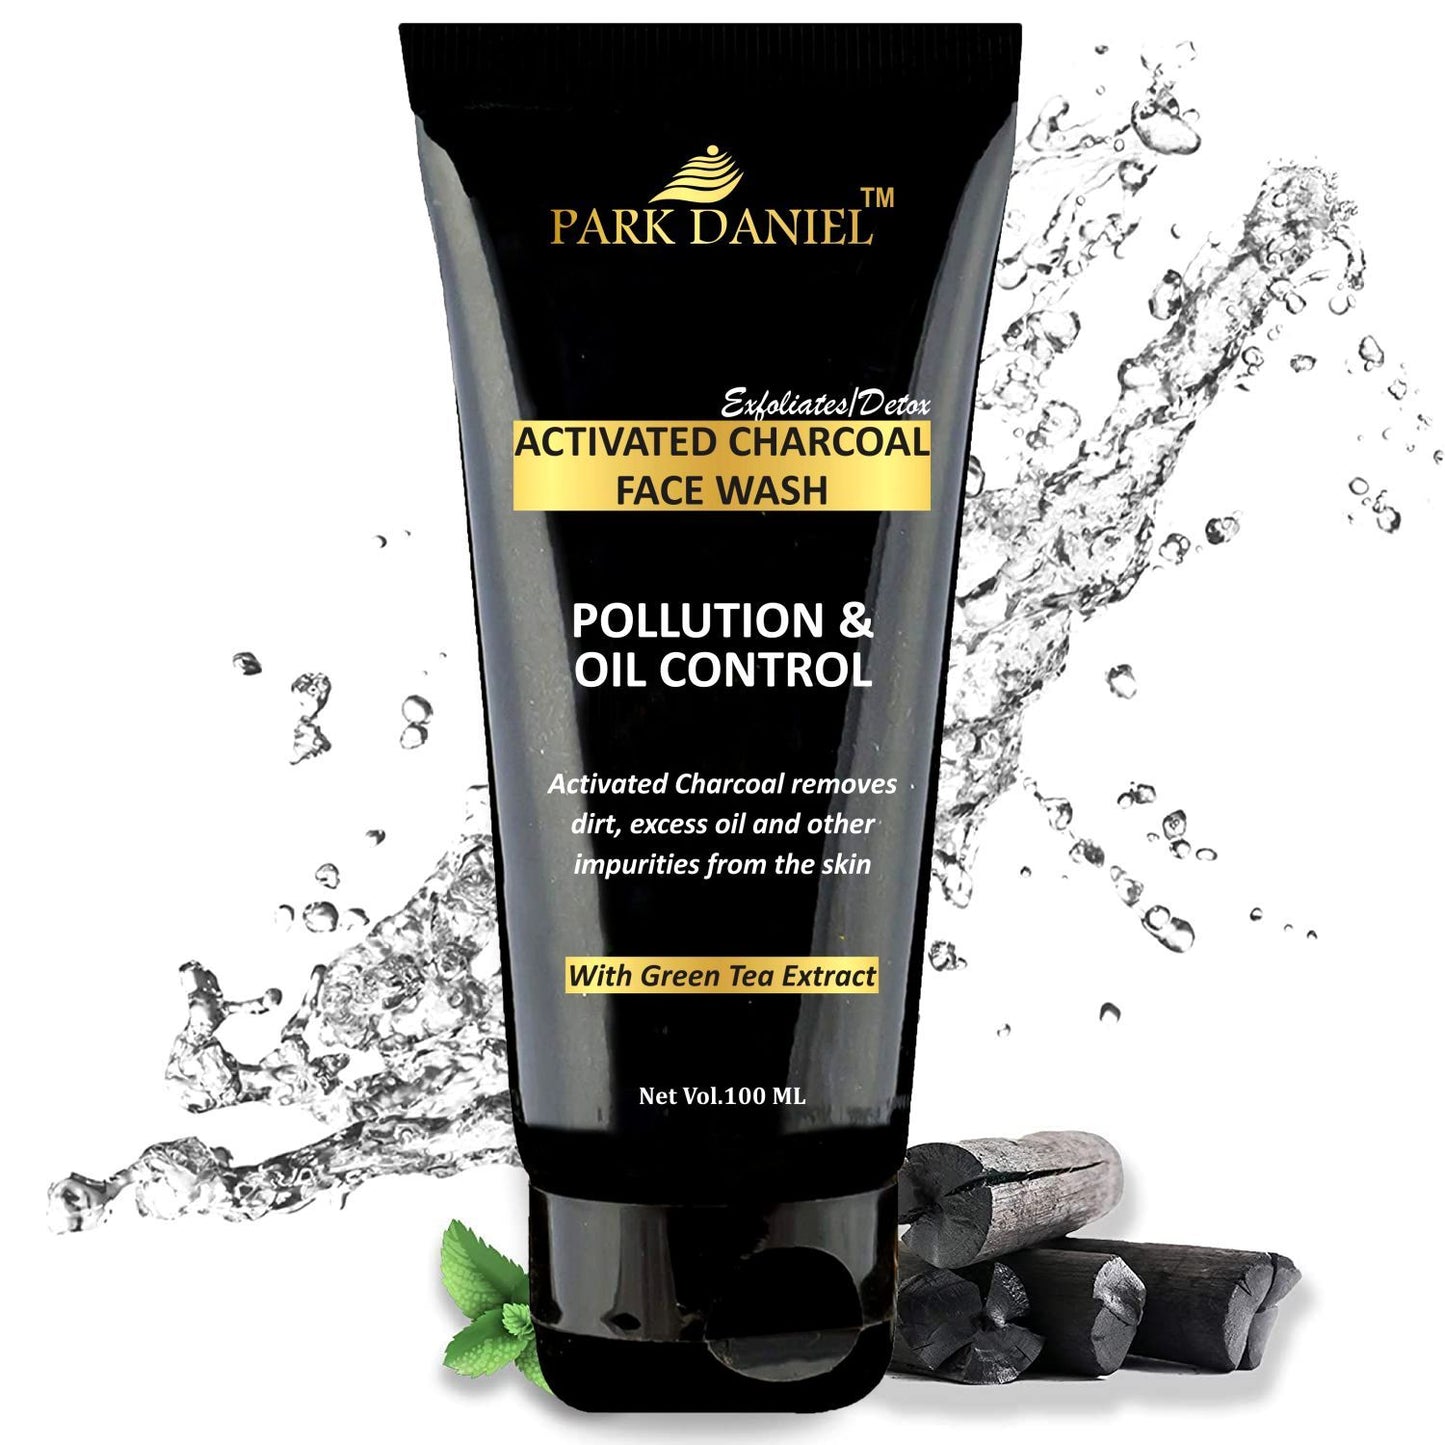 Park Daniel Activated Charcoal Face Wash -Pollution & Oil Control- To Remove Dirt, Excess Oil (100 ML), Black